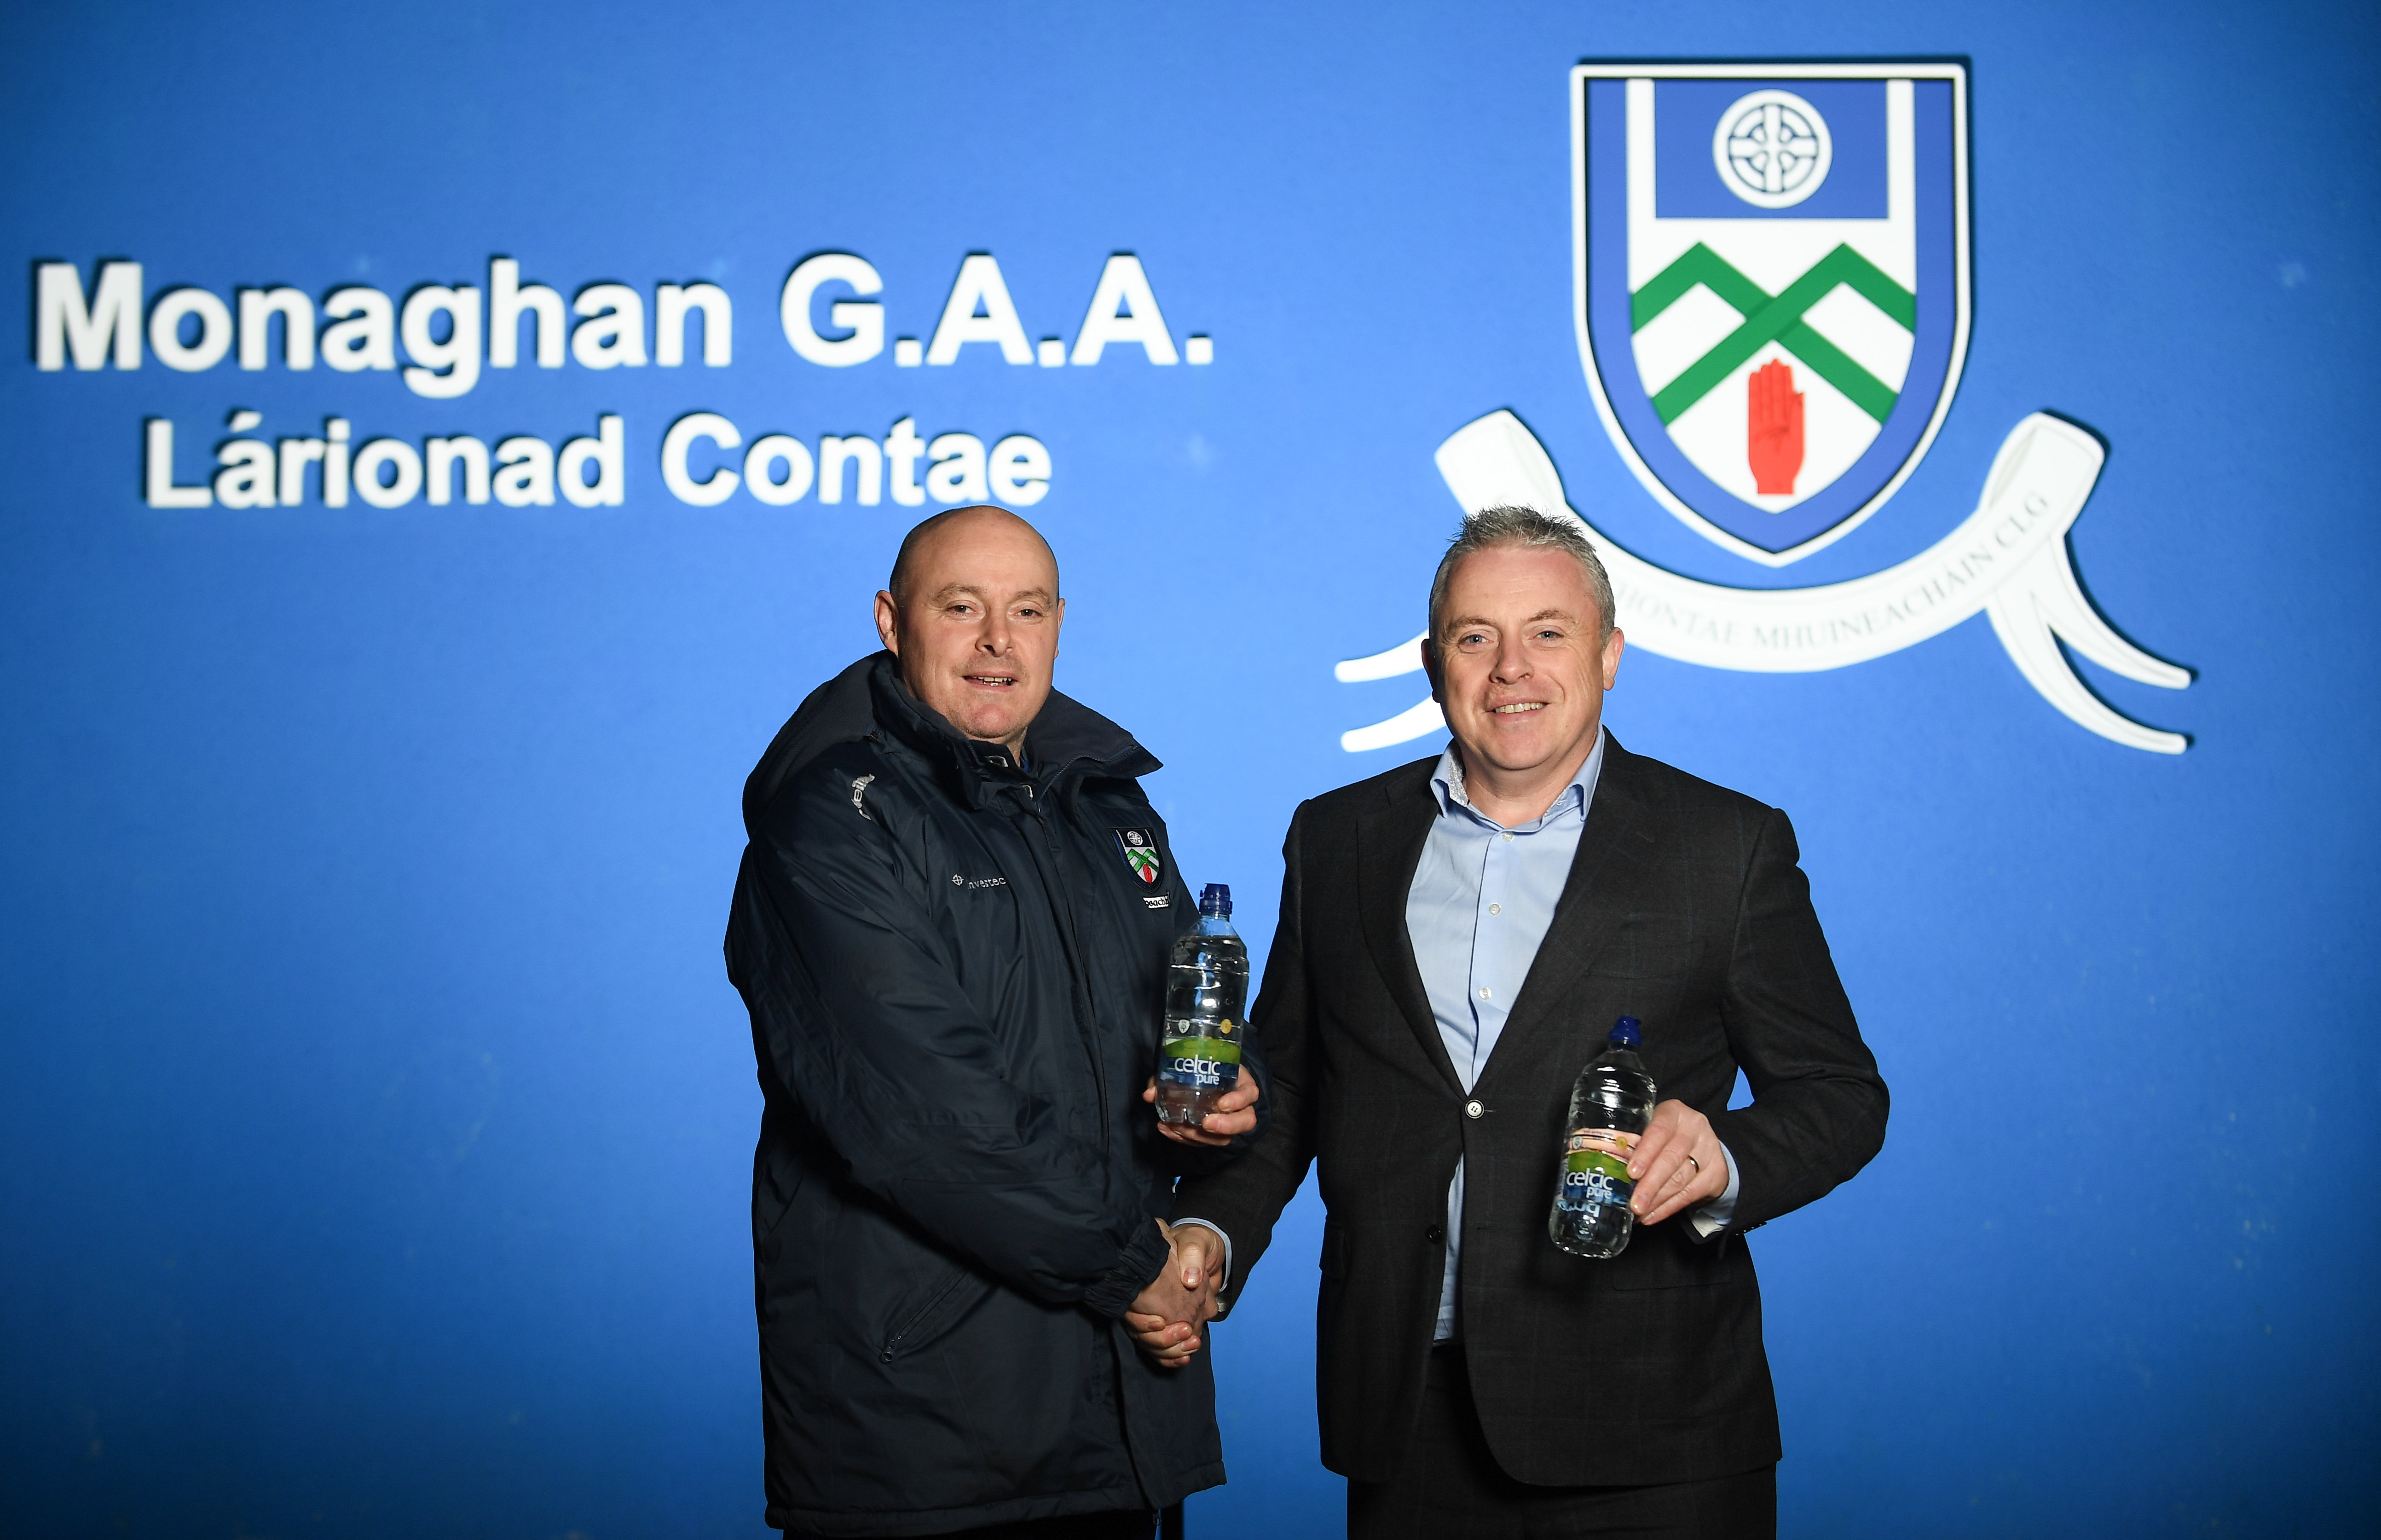 Celtic Pure Springs to Action with Monaghan GAA